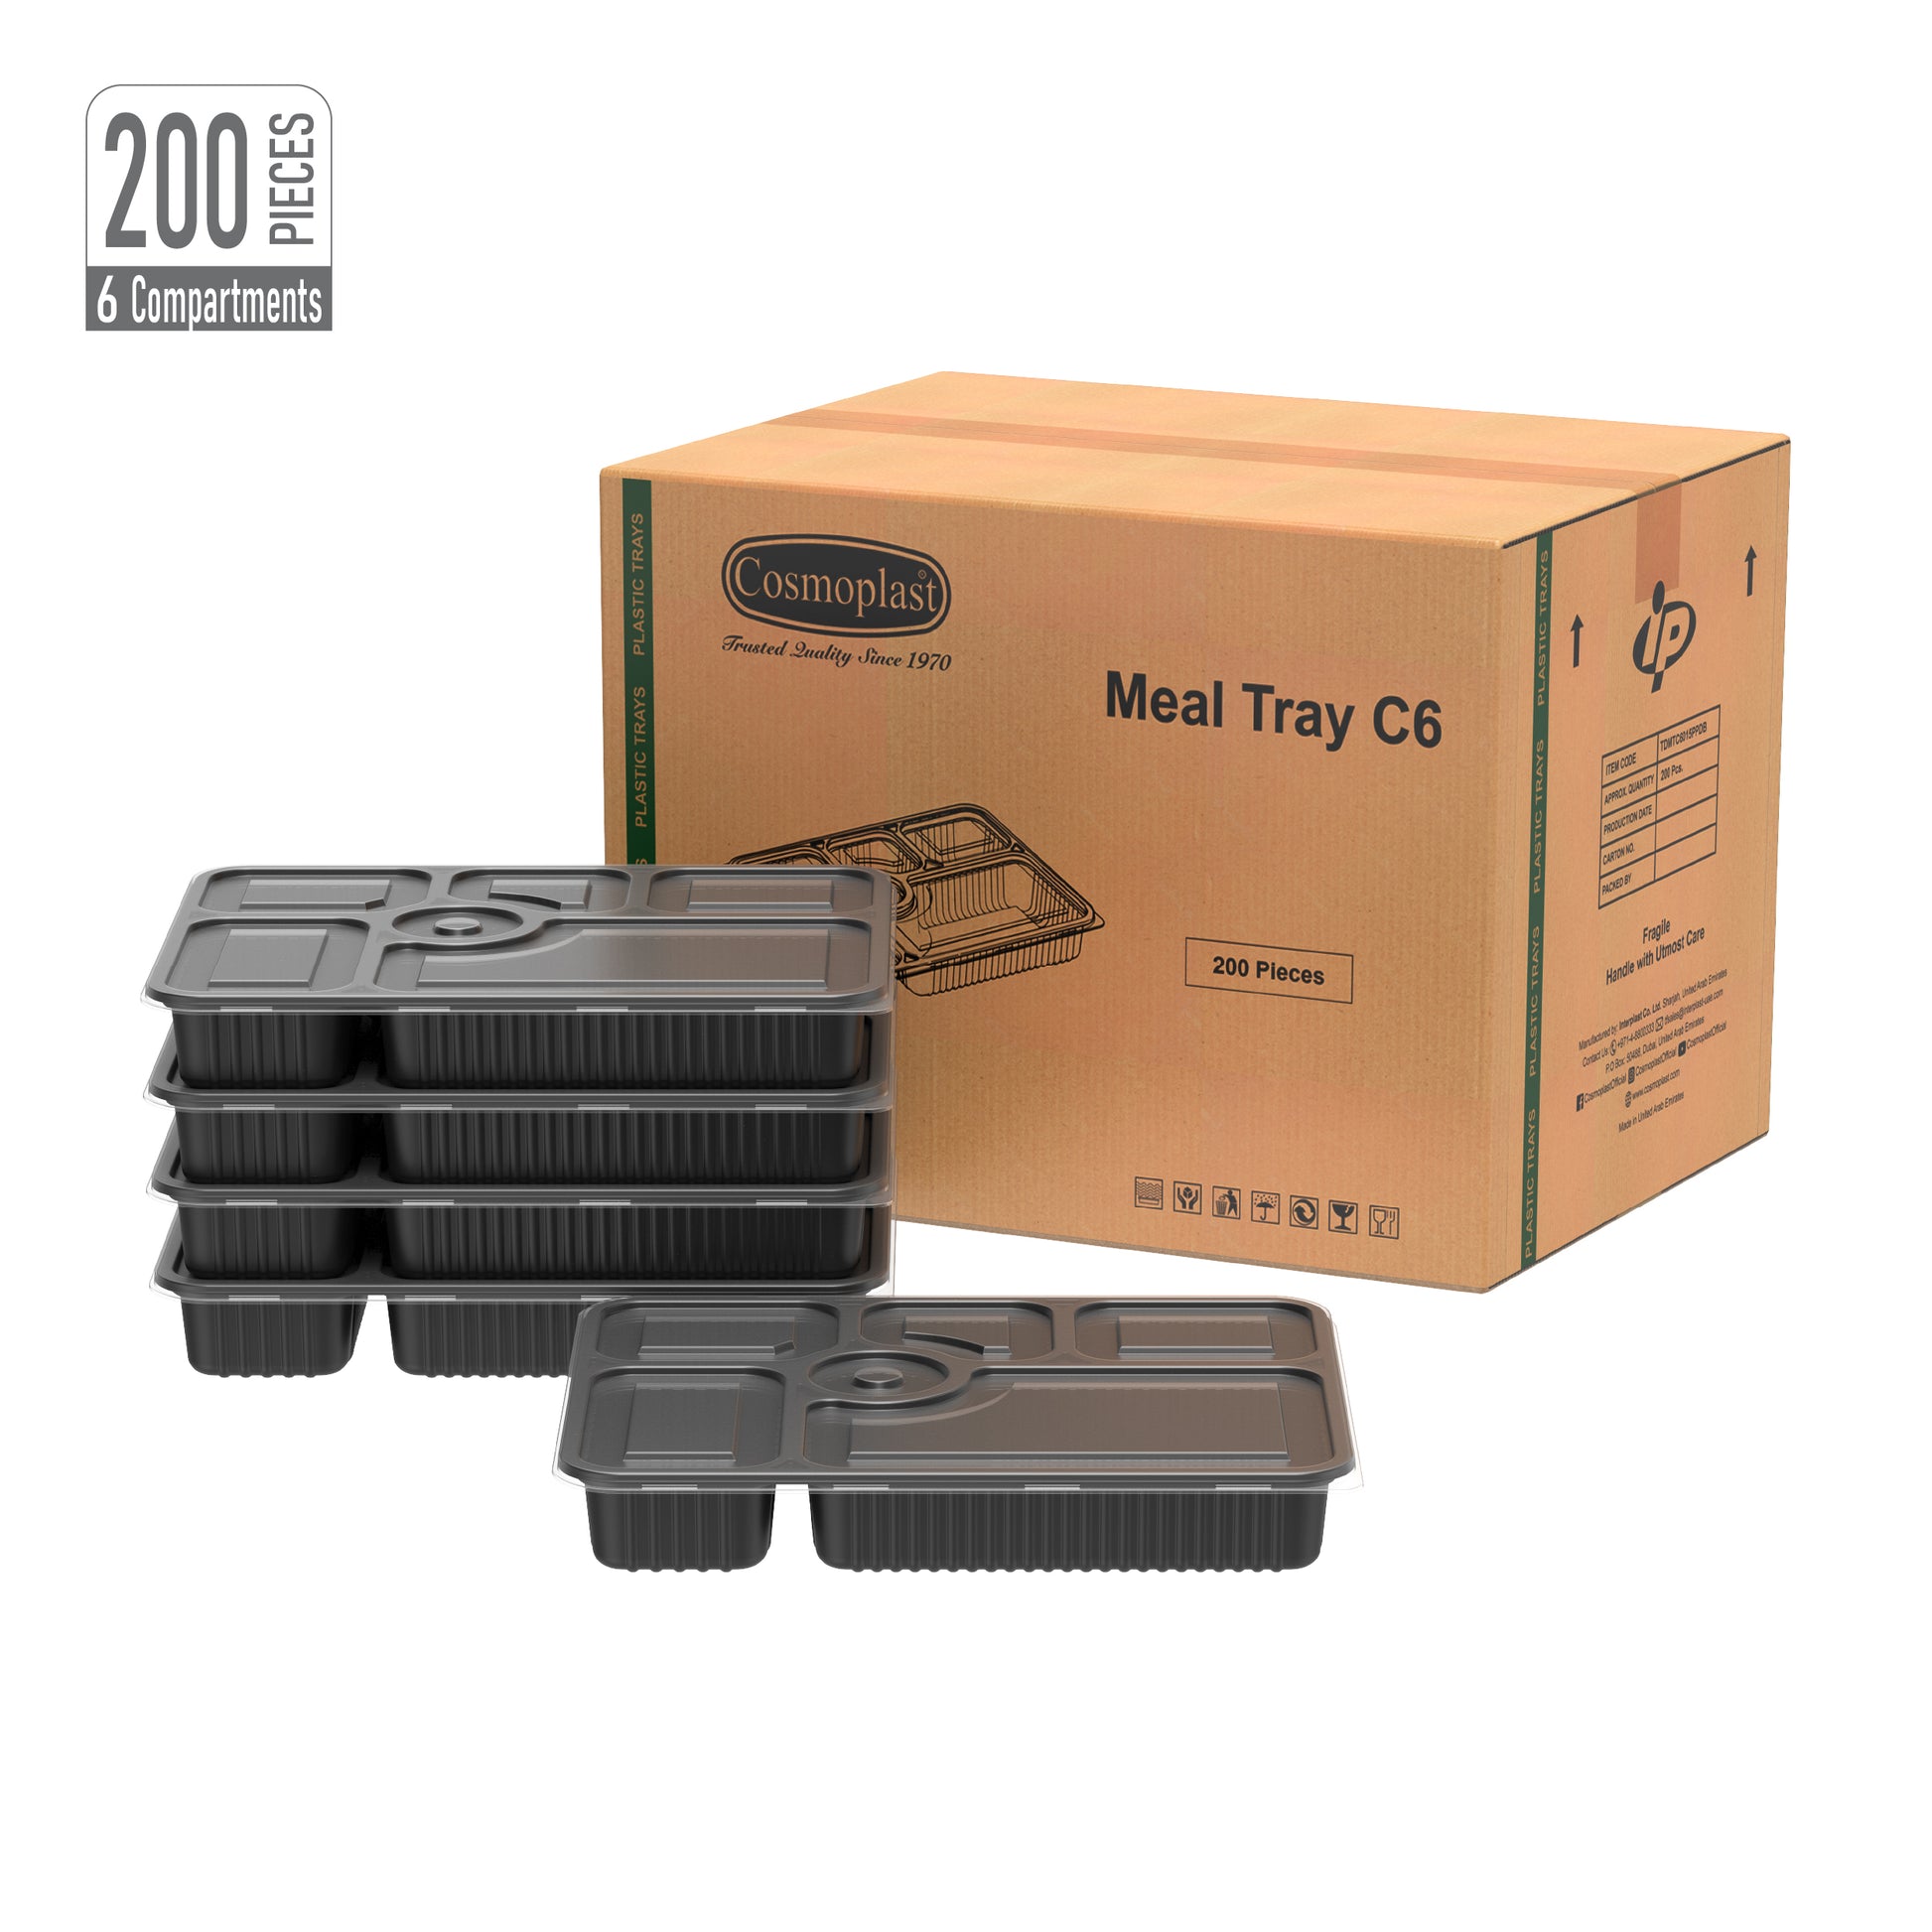 6 Compartments Carton of 200 Black Meal Containers with Clear Lids